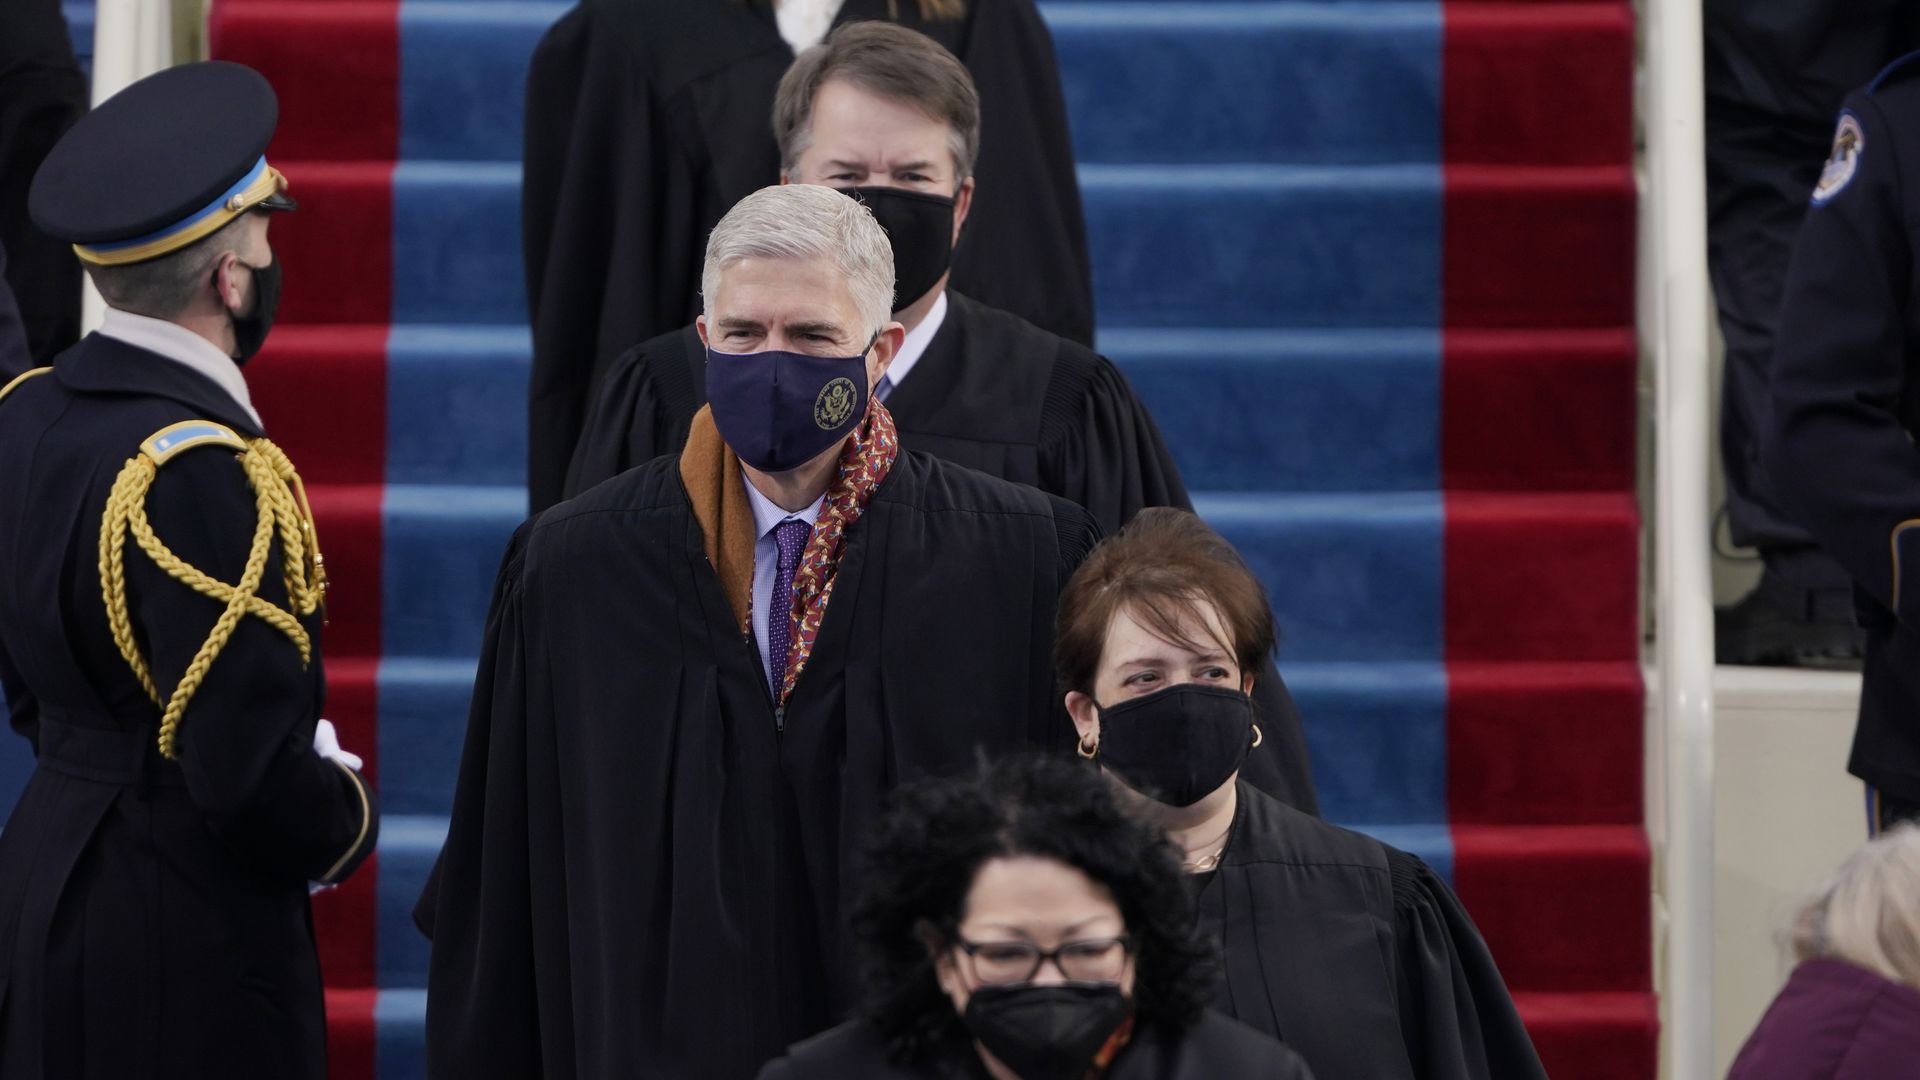 Supreme Court Justices at Biden's inauguration in January 2021.